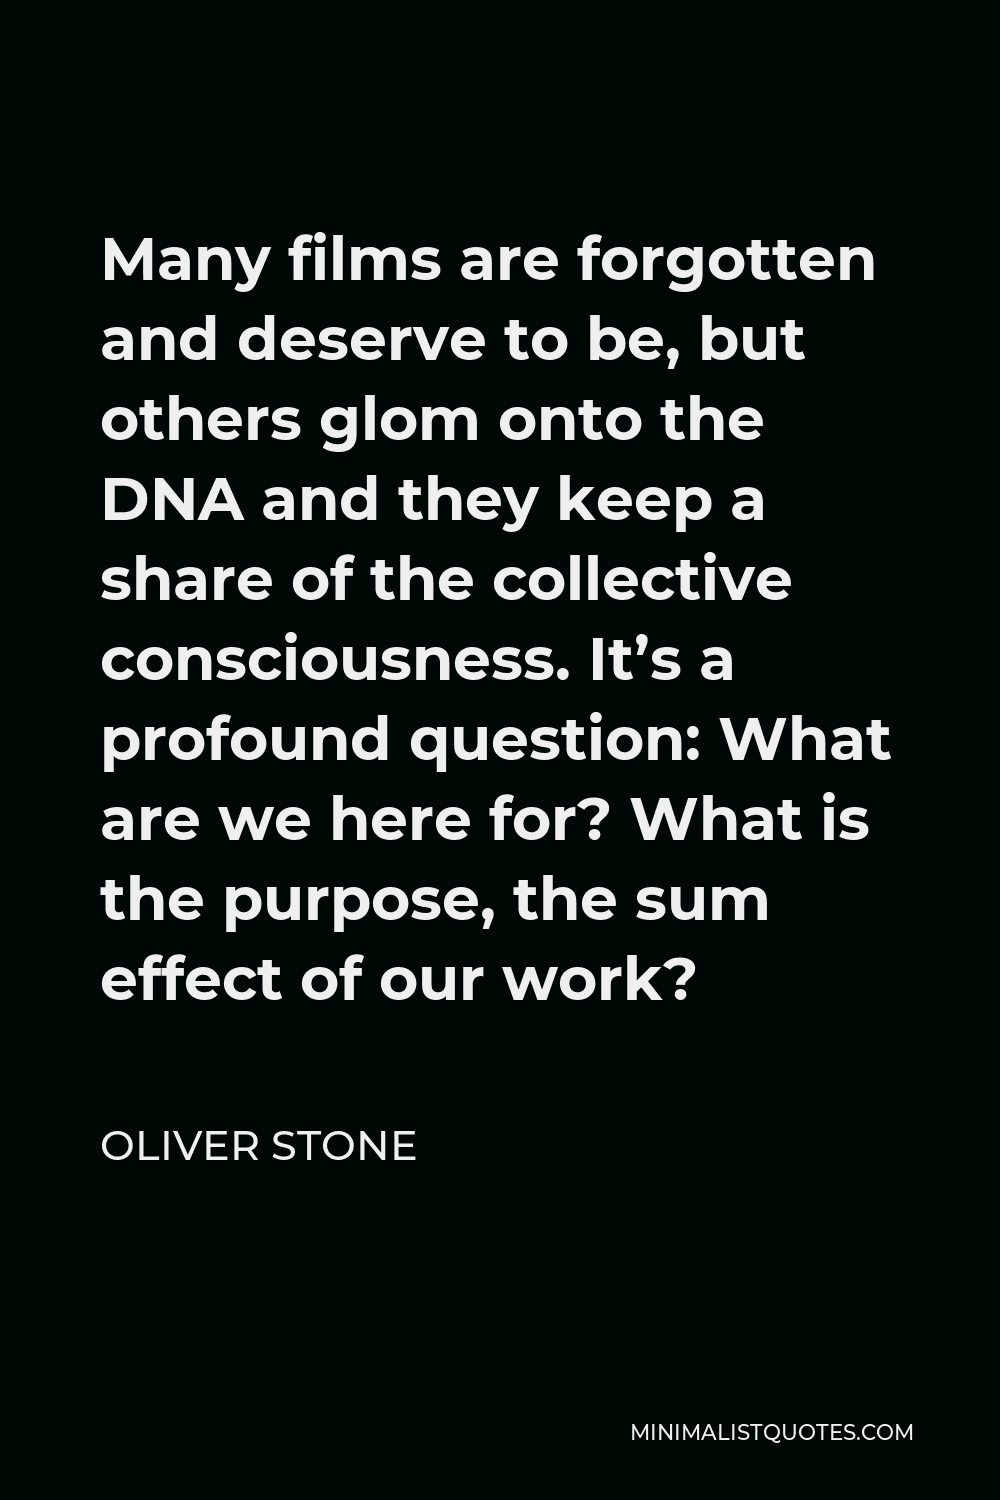 Oliver Stone Quote - Many films are forgotten and deserve to be, but others glom onto the DNA and they keep a share of the collective consciousness. It’s a profound question: What are we here for? What is the purpose, the sum effect of our work?